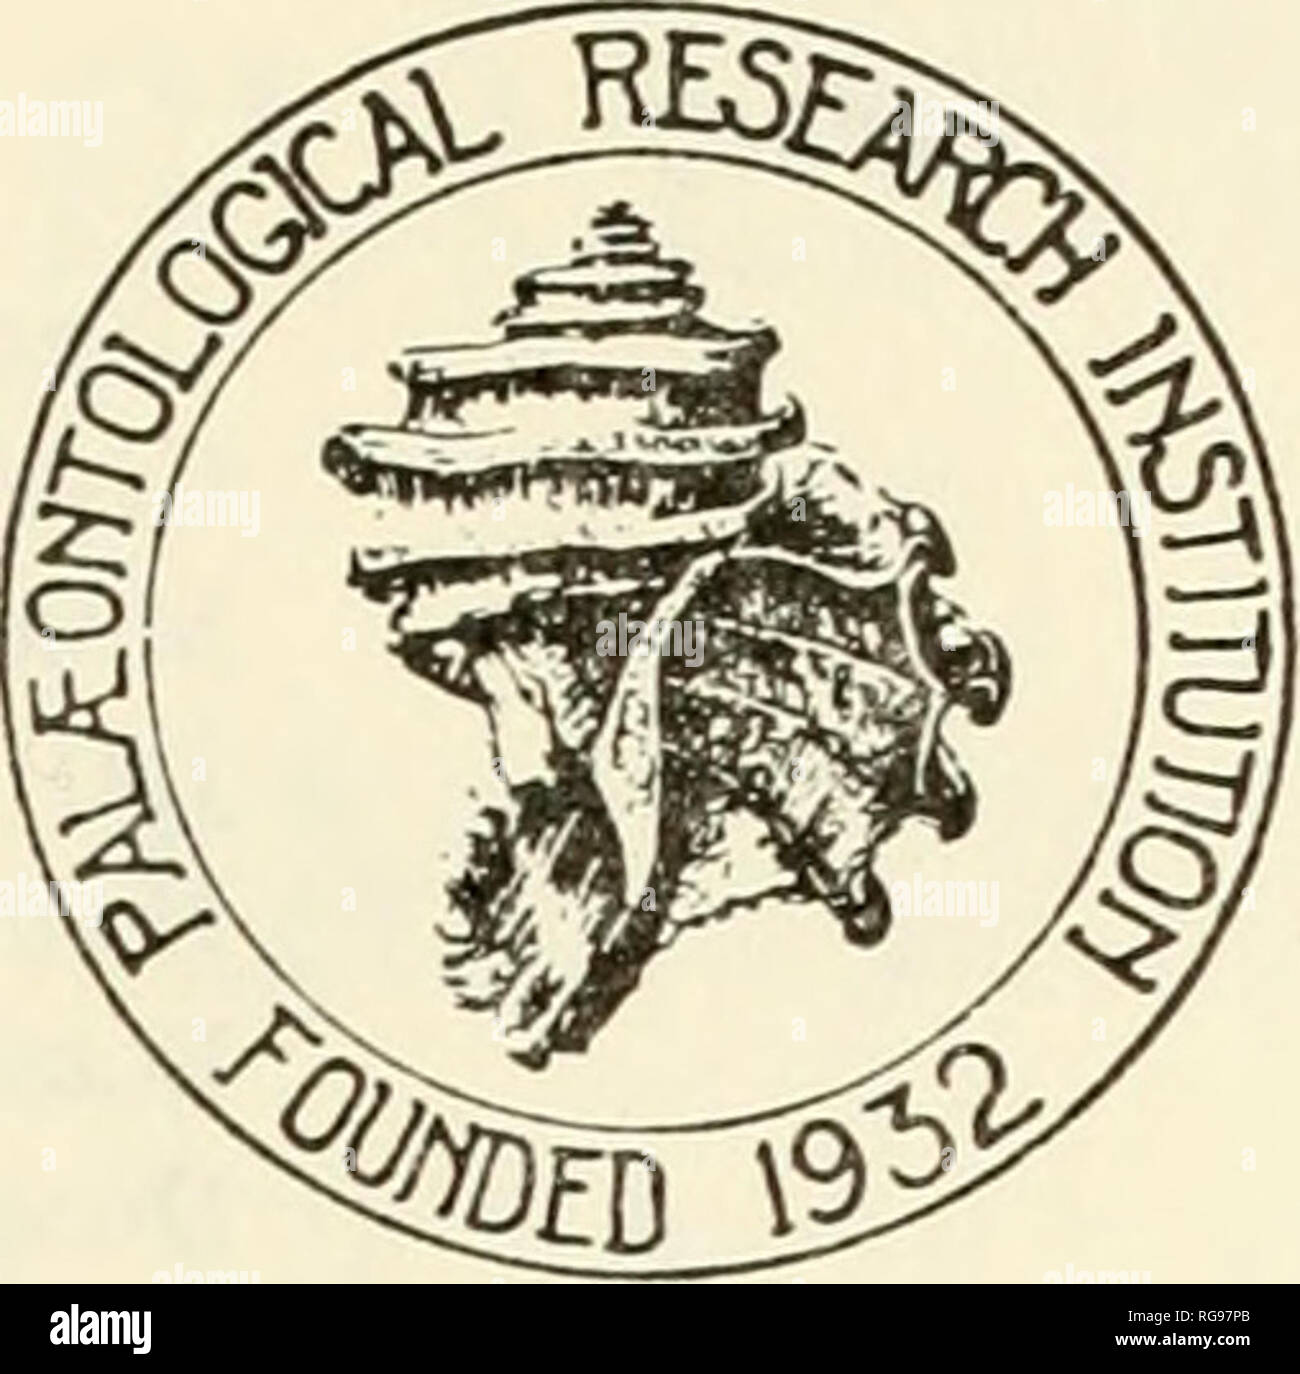 . Bulletins of American paleontology. . The Paleontological Research Institution acknowledges with special thanks the contributions of the following individuals and institutions ($1000 or more at Armand L. Adams (1976) James A. Allen (1967) American Oil Company (1976) Atlantic Richfield Company (1978) Miss Ethel Z. Bailey (1970) Christina L. Balk (1970) Mr. &amp; Mrs. Kenneth E. Caster (1967 Chevron Oil Company (1978) Exxon Company (1977 to date) Lois S. Fogelsanger (1966) Gulf Oil Corporation (1978) Merrill W. Haas (1975) PATRONS the discretion of the contributor) Miss Rebecca S. Harris (1967 Stock Photo